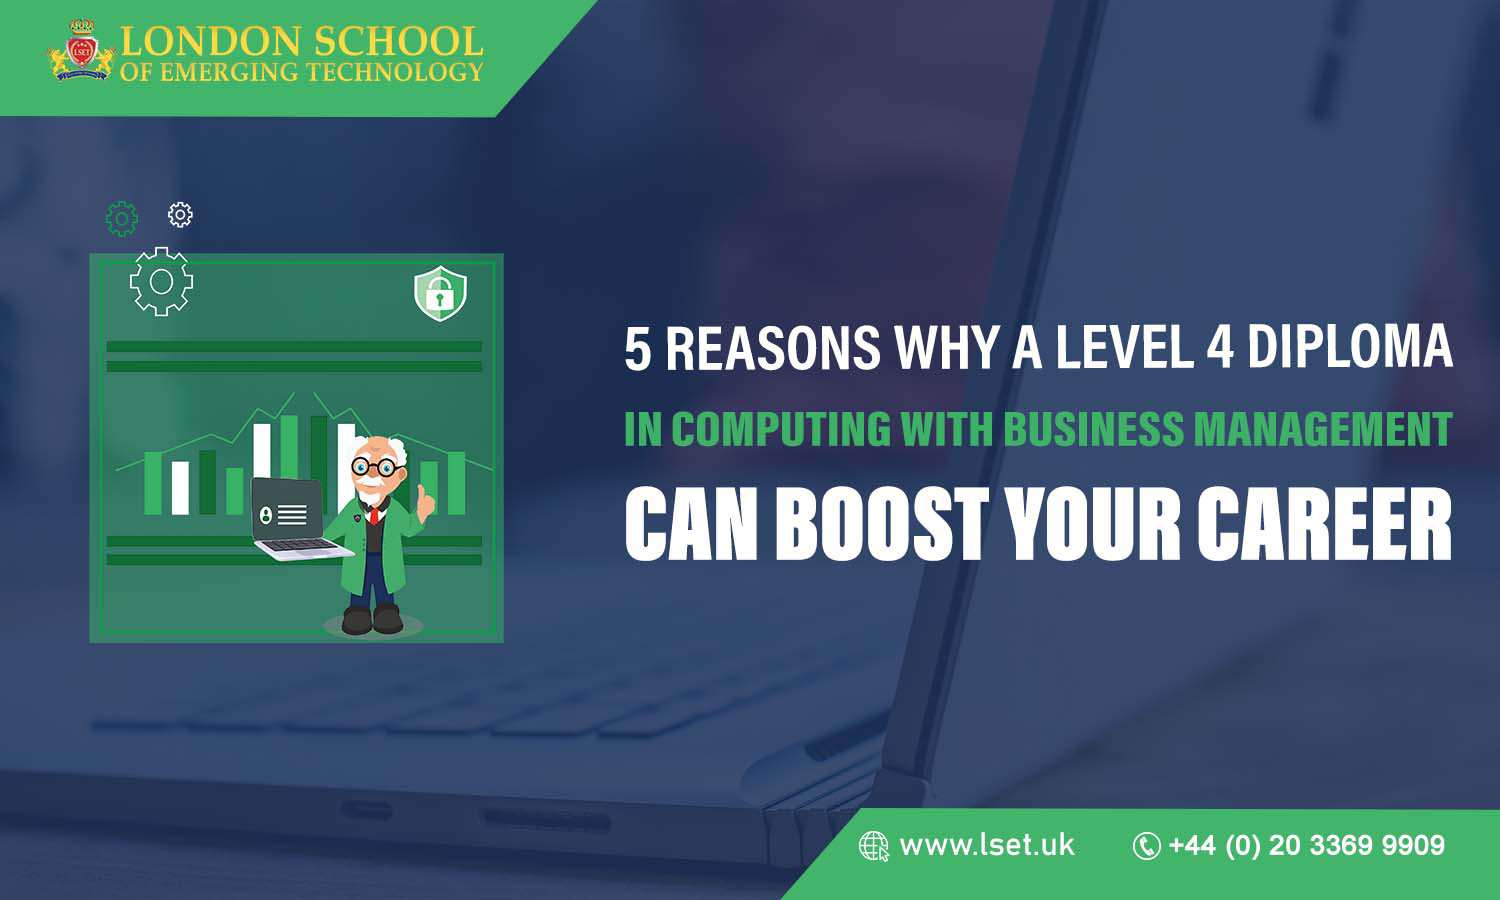 5 Reasons Why a Level 4 Diploma in Computing with Business Management can Boost Your Career